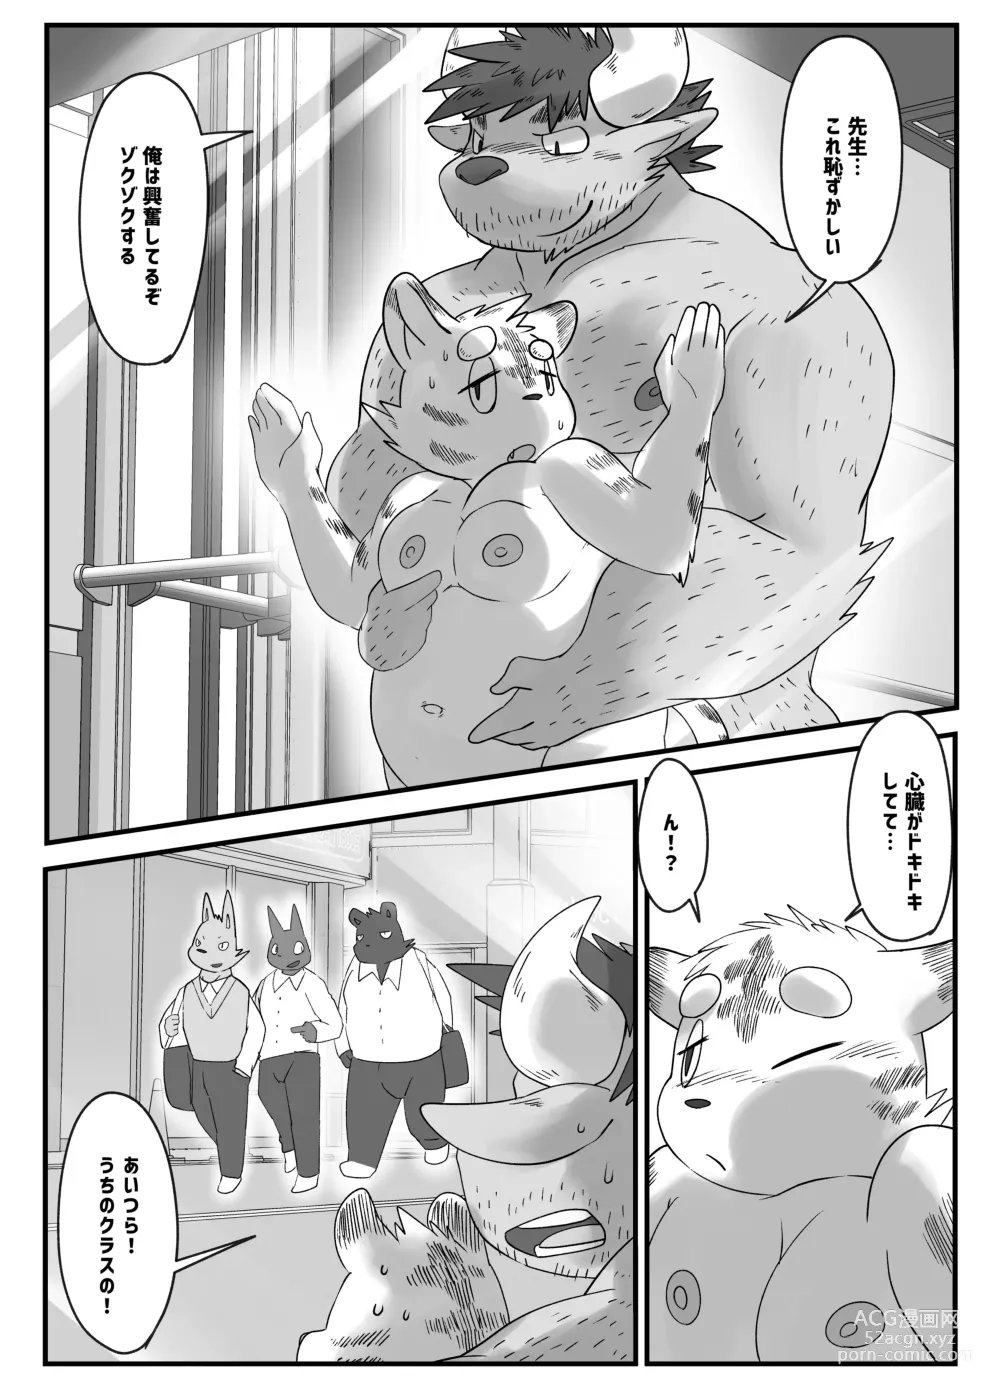 Page 19 of doujinshi Muscular Bull Teacher & Chubby Tiger Student 4